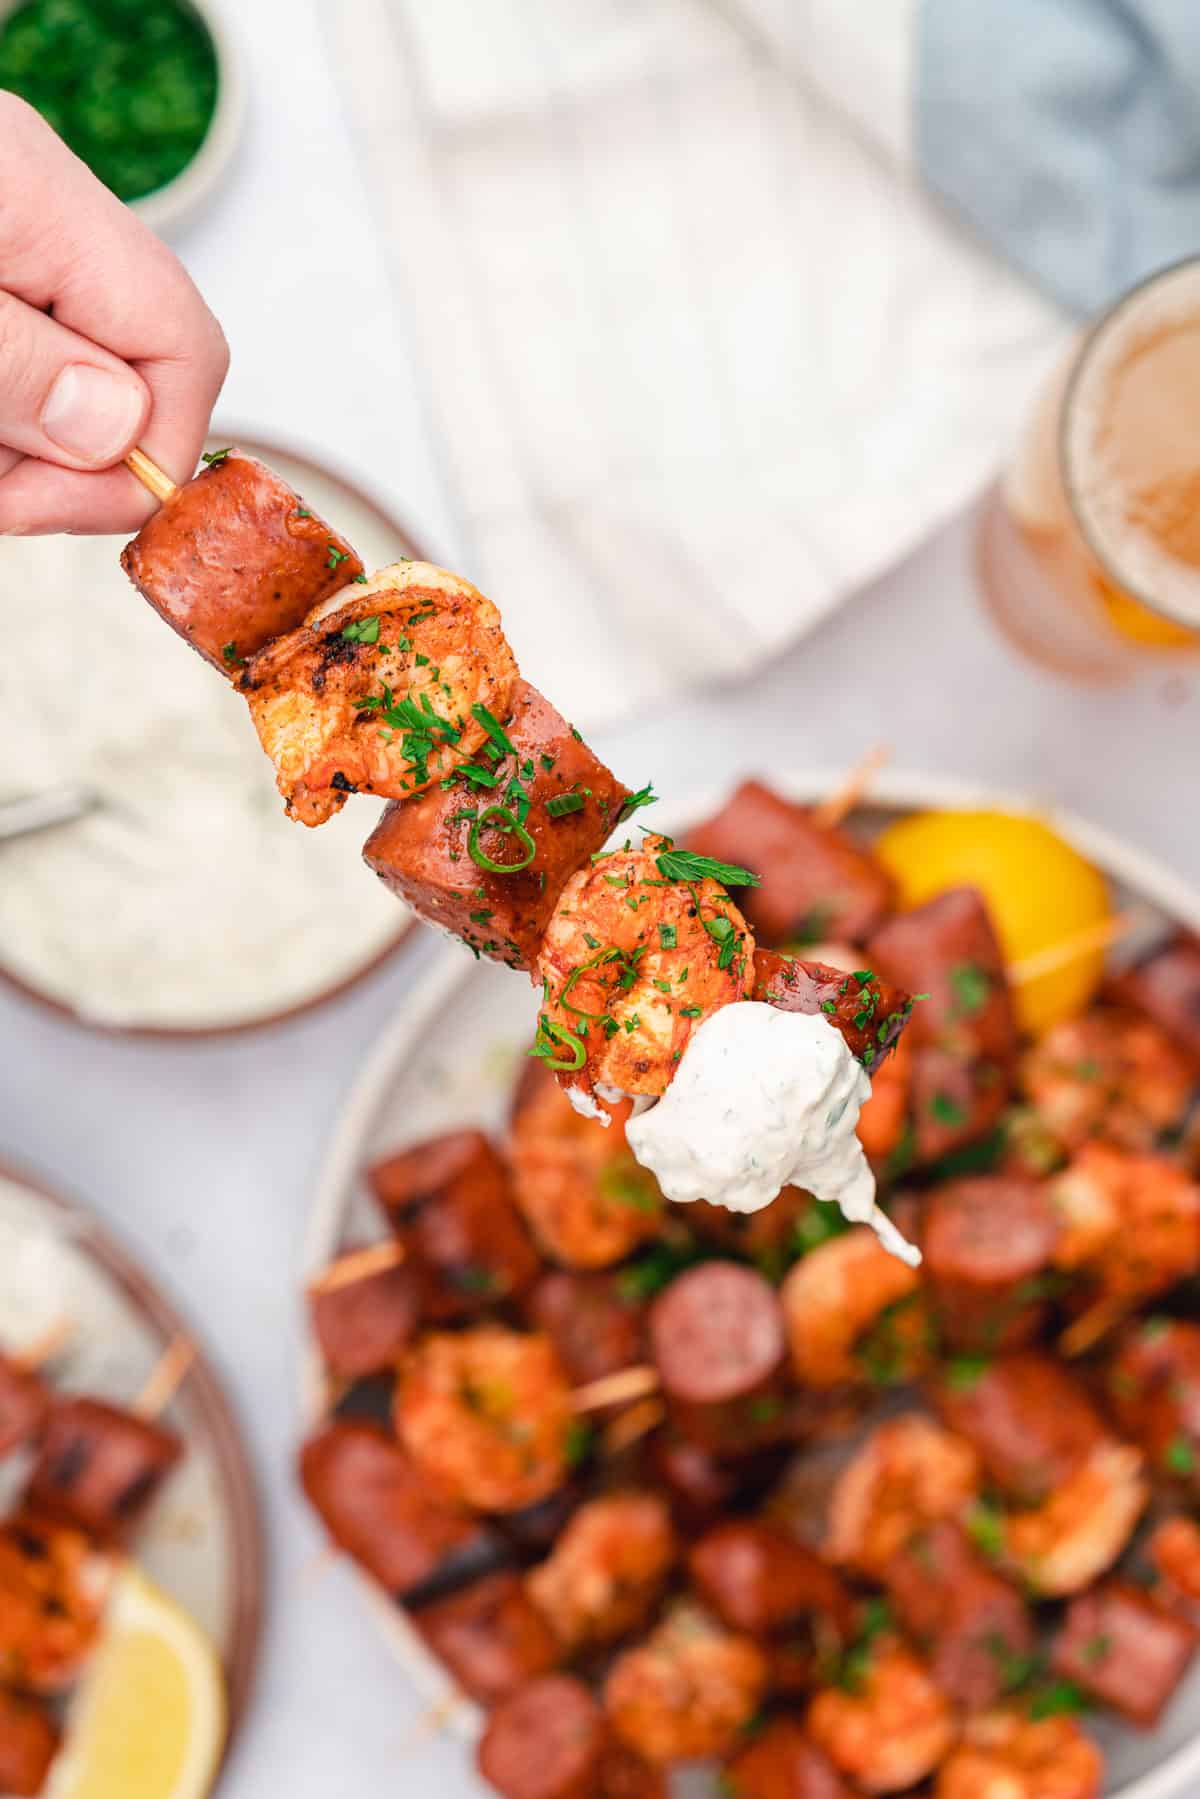 grilled smoked sausage and shrimp skewer hand held with a creamy dipping sauce at the tip